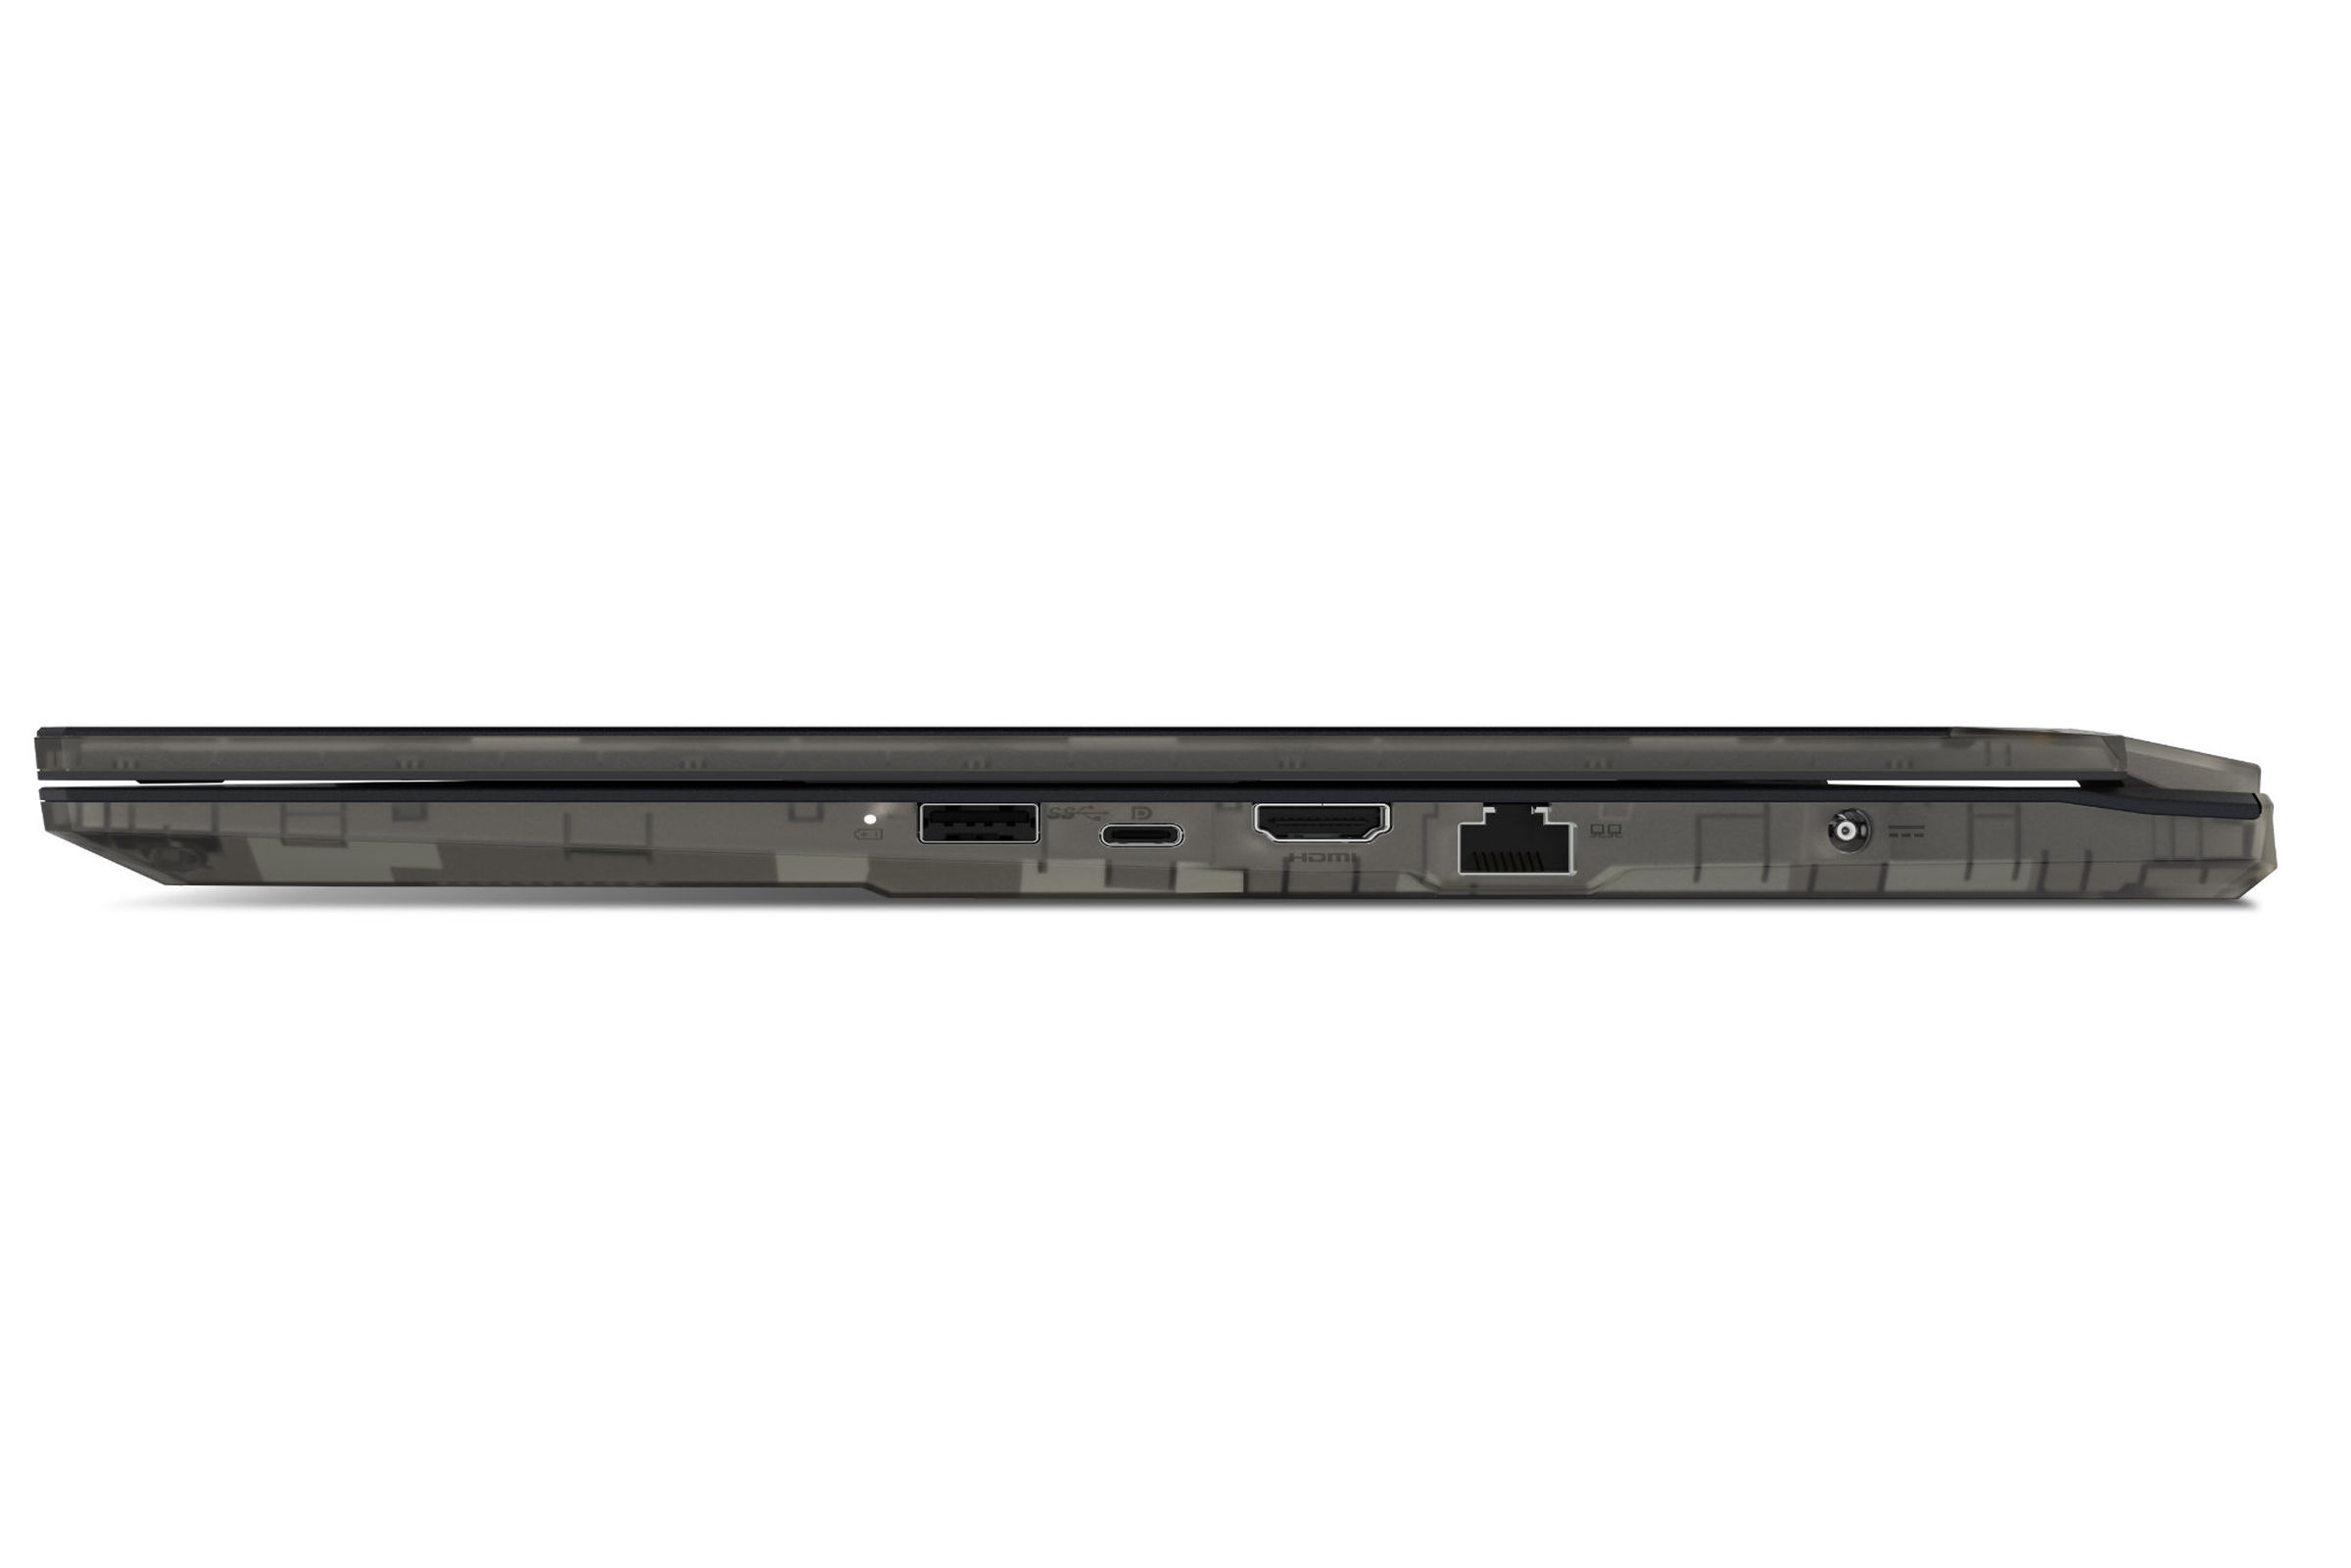 The side view of the MSI Cyborg 15 for 2023, revealing a power port, HDMI port, Ethernet, USB-C and a USB Type-A port.